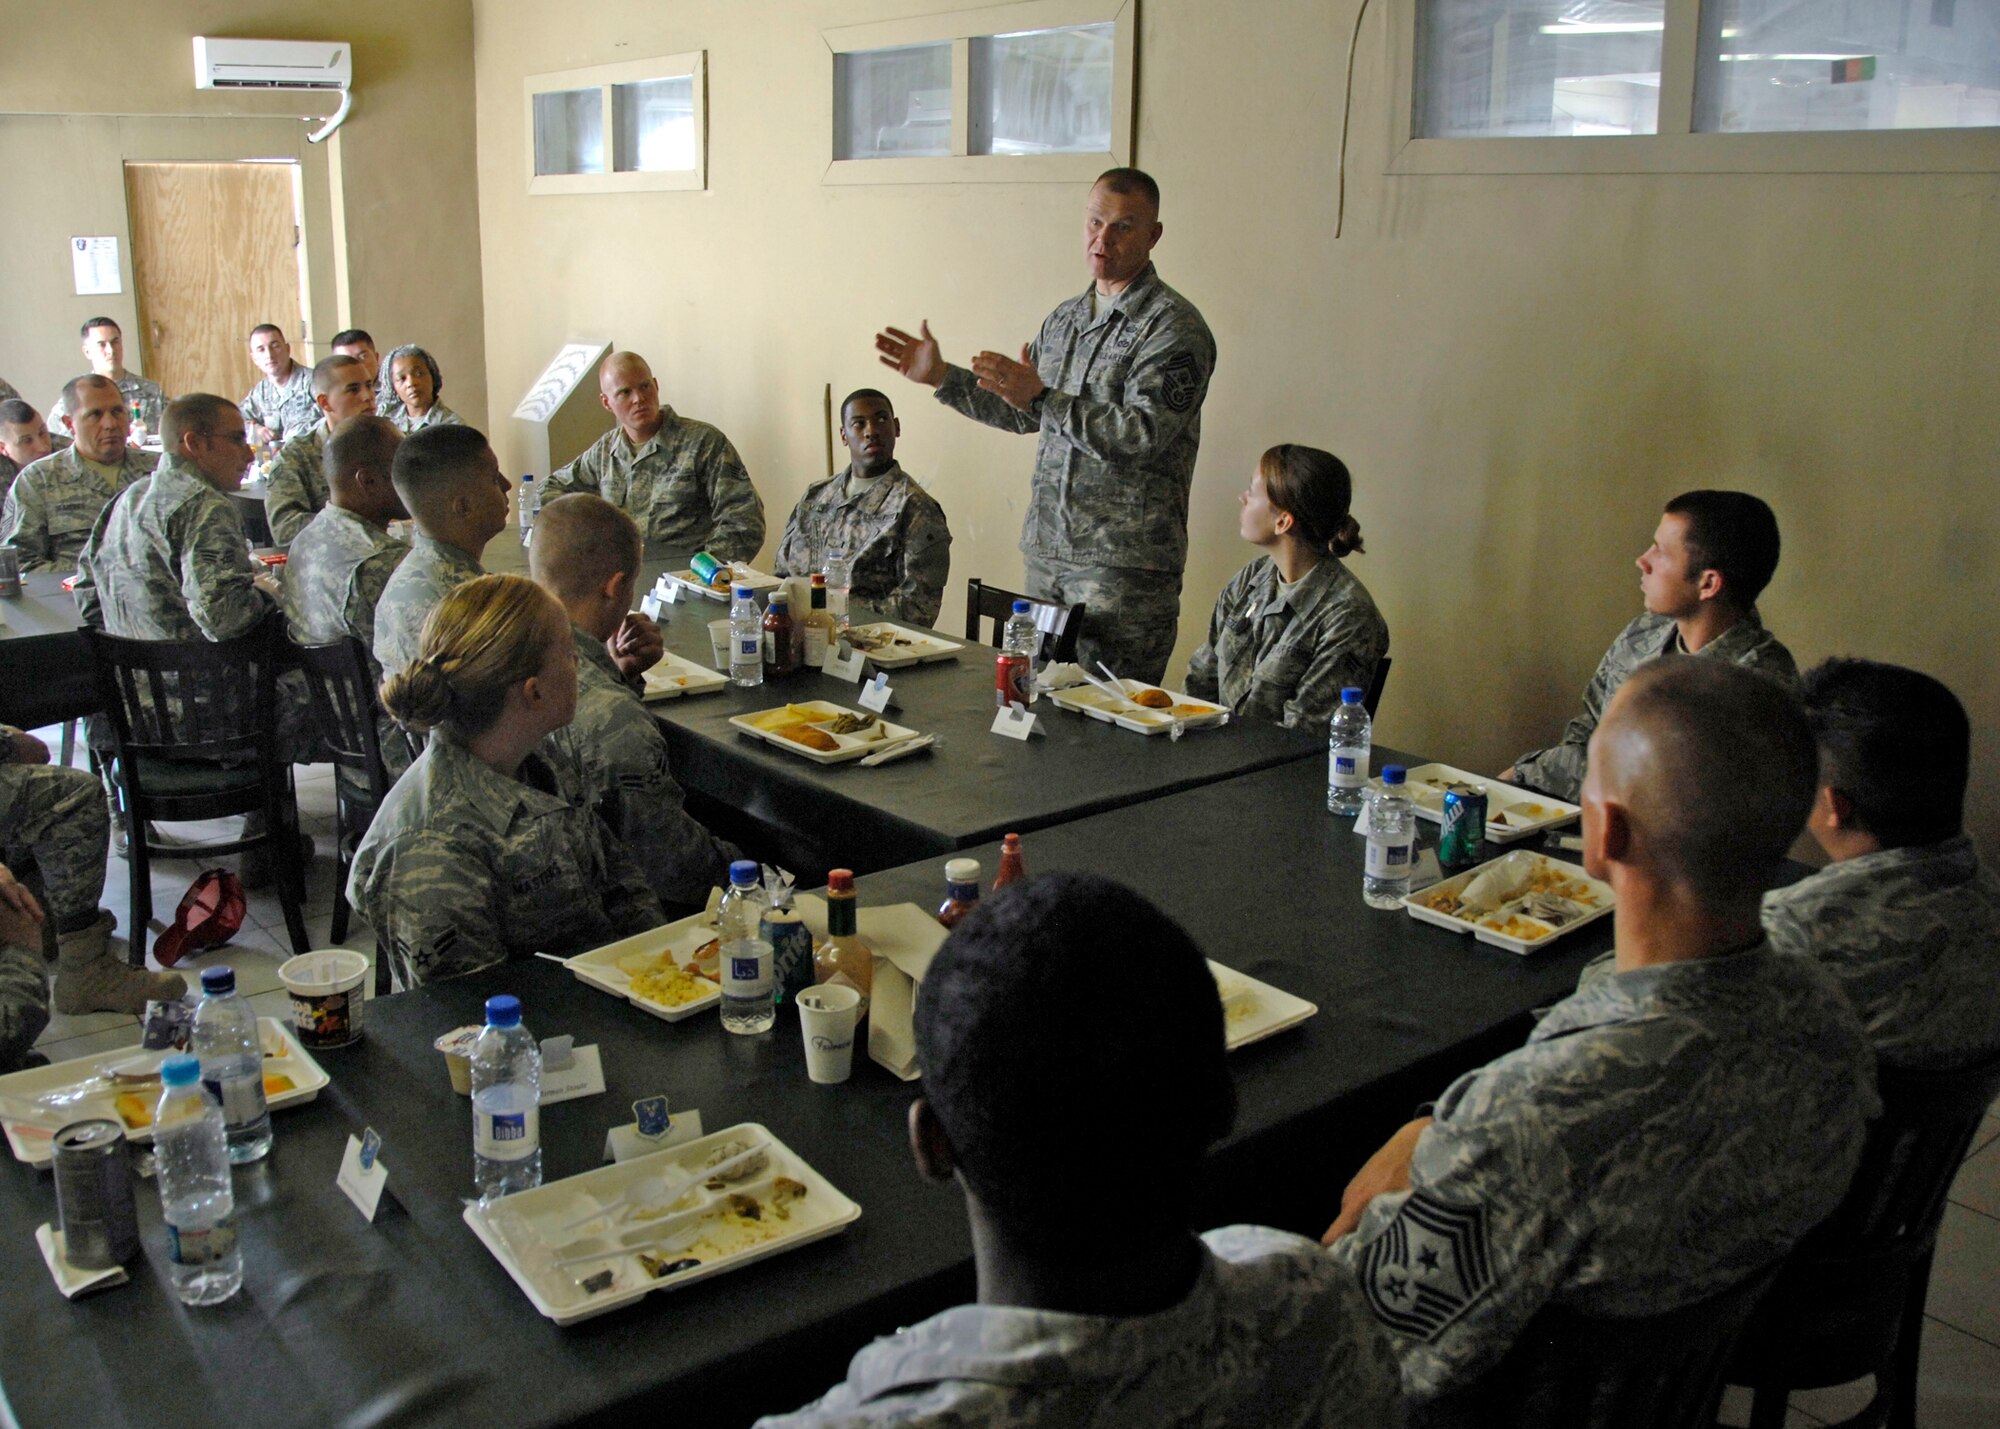 Chief Master Sgt. of the Air Force James A. Roy speaks to Airmen explaining how experiences in a combat environment will benefit them in their future careers Nov. 30, 2009 at Kandahar Airfield, Afghanistan. Chief Roy also took time after the luncheon to answer Airmen's questions about current events and future plans for the Air Force. (U.S. Air Force photo/Senior Airman Timothy Taylor)